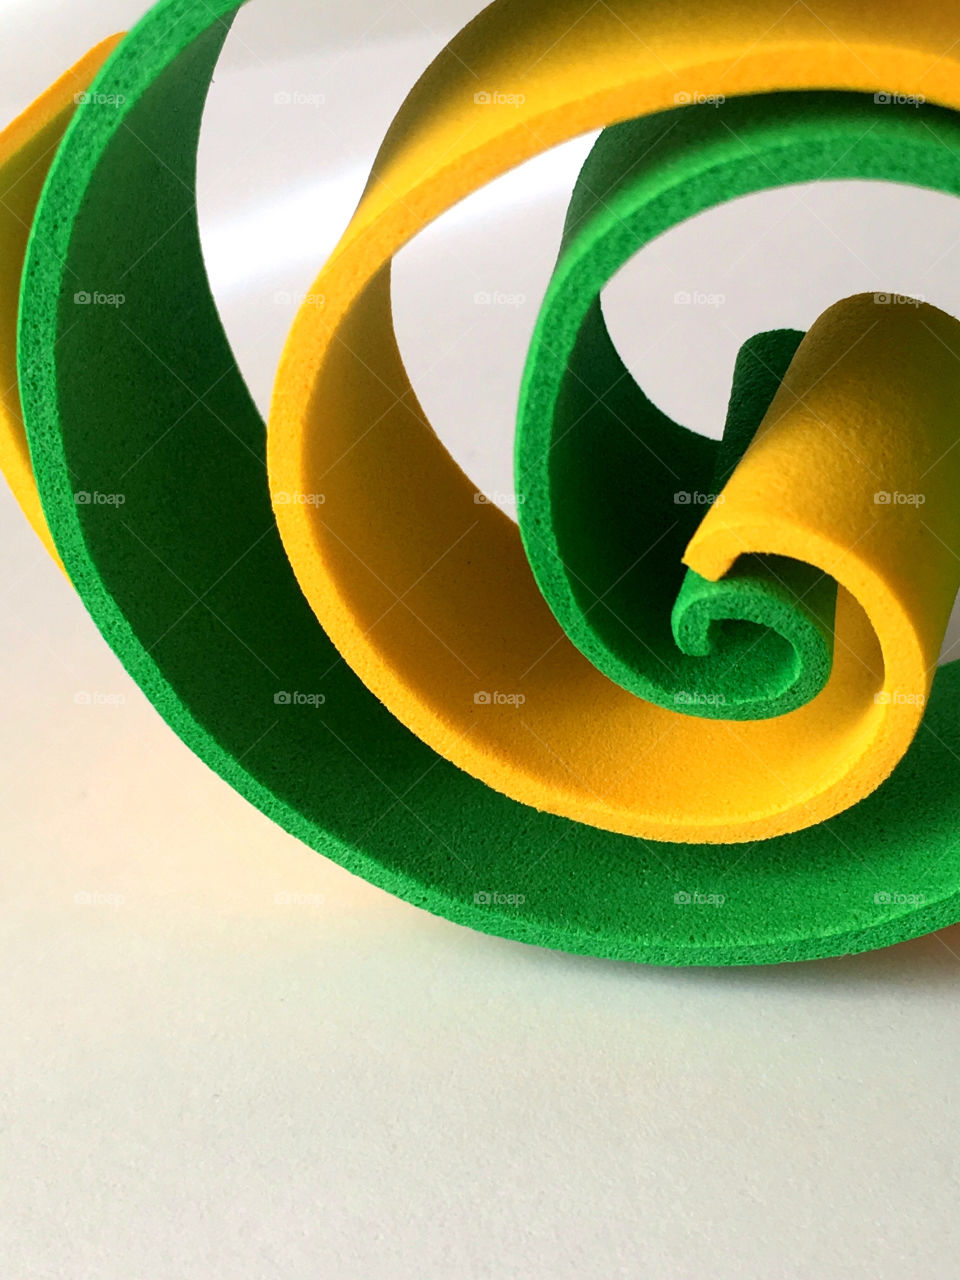 Green and yellow spirals